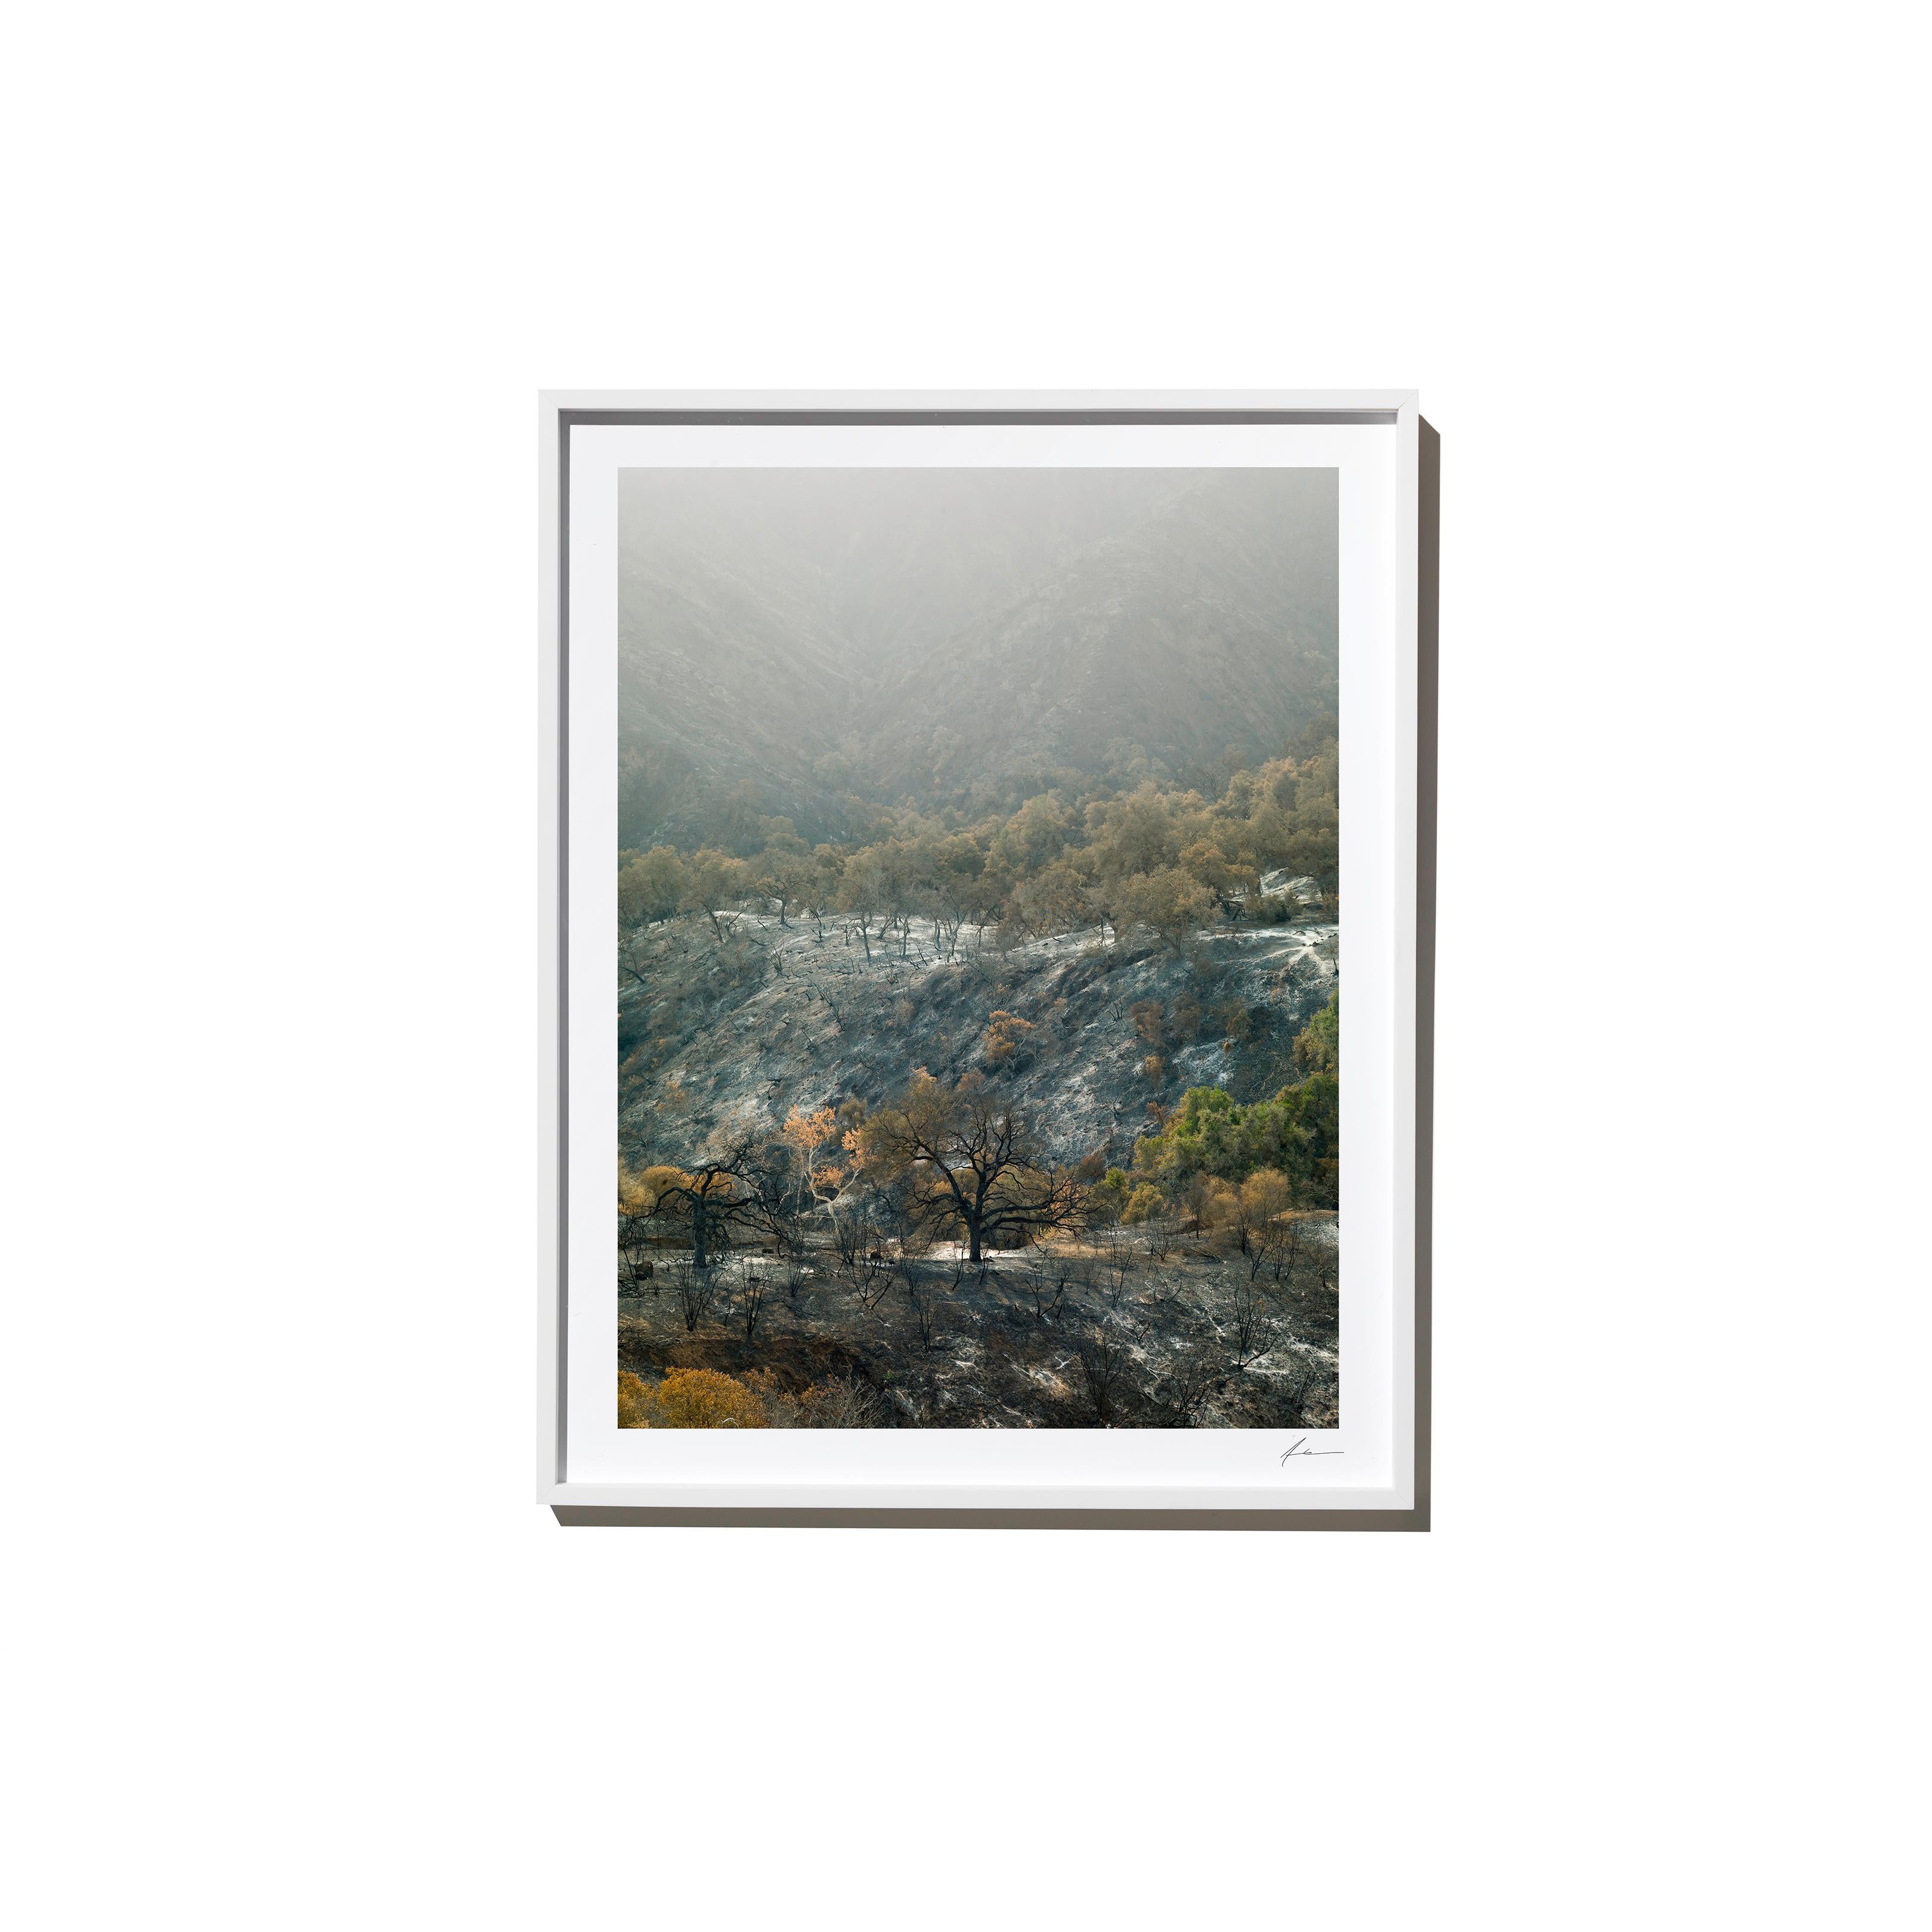 "Vista" is a framed color landscape photograph by Los Angeles-based photographer Timothy Hogan. 

Frame available in white or black, please specify on order. Please allow 15 days for production before shipping.

Editions and sizes as